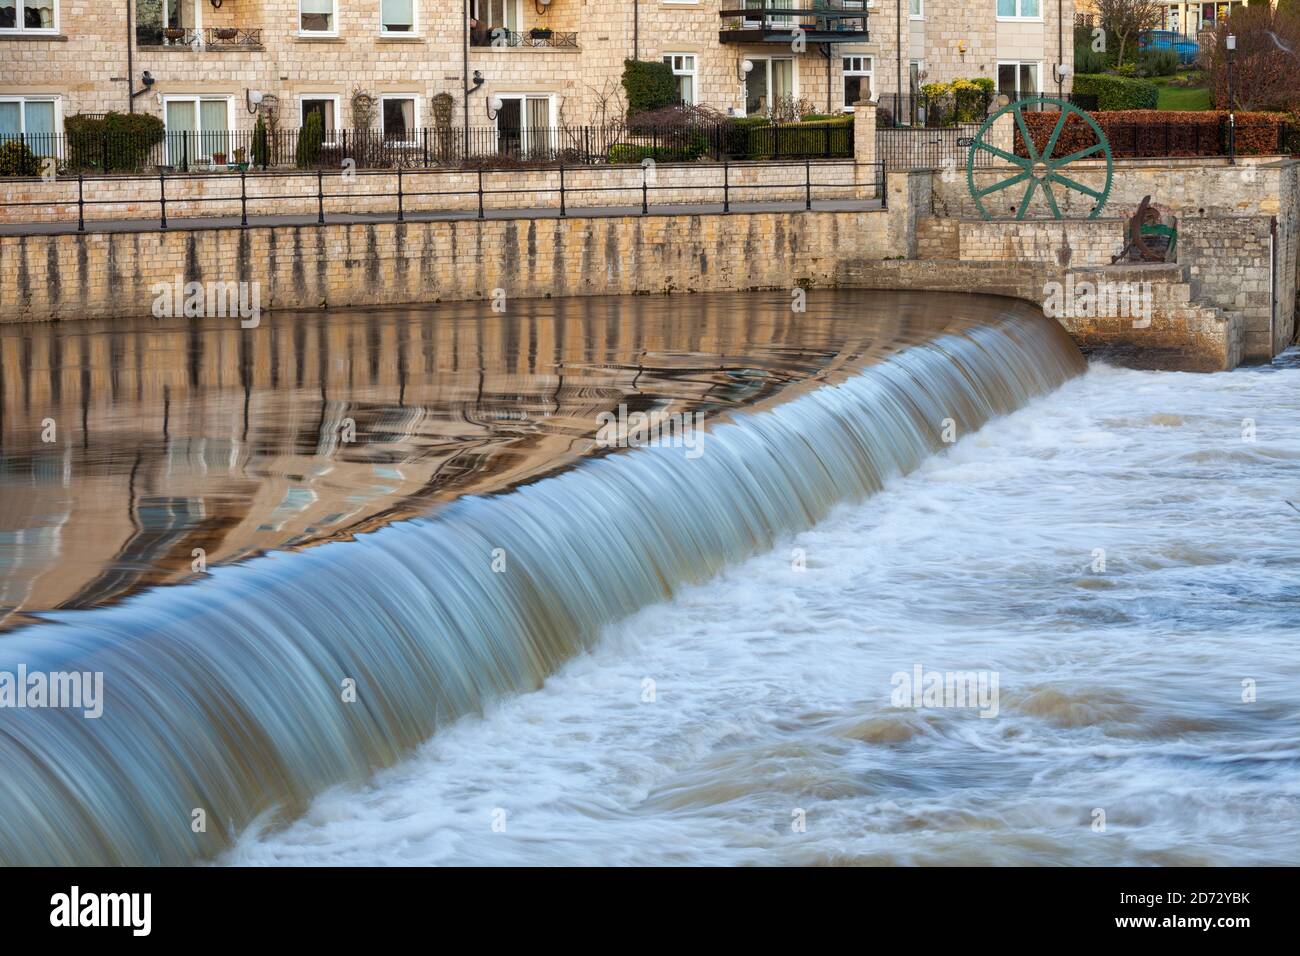 Il weir sul fiume Wharfe a Wetherby in West Yorkshire Foto Stock